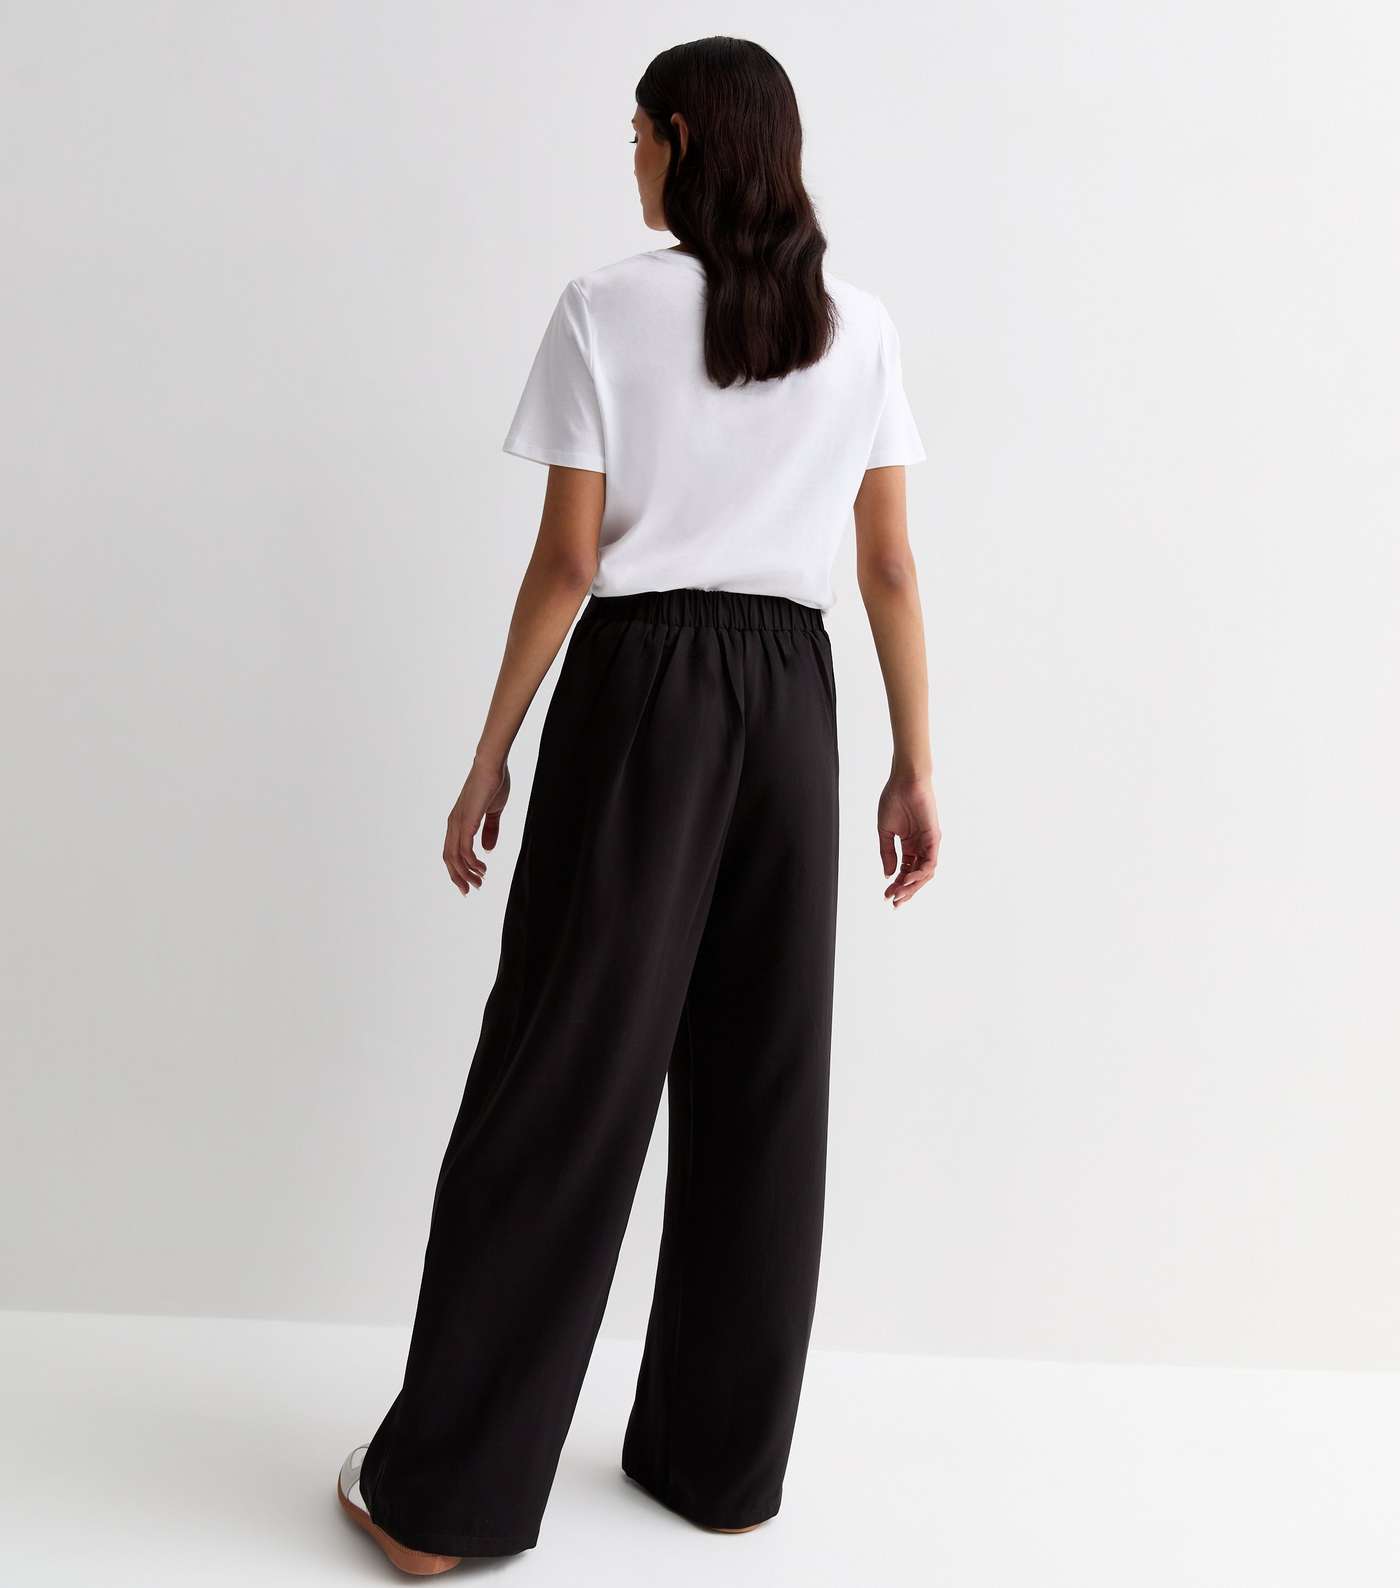 Black Elasticated Tailored Wide Leg Trousers Image 4